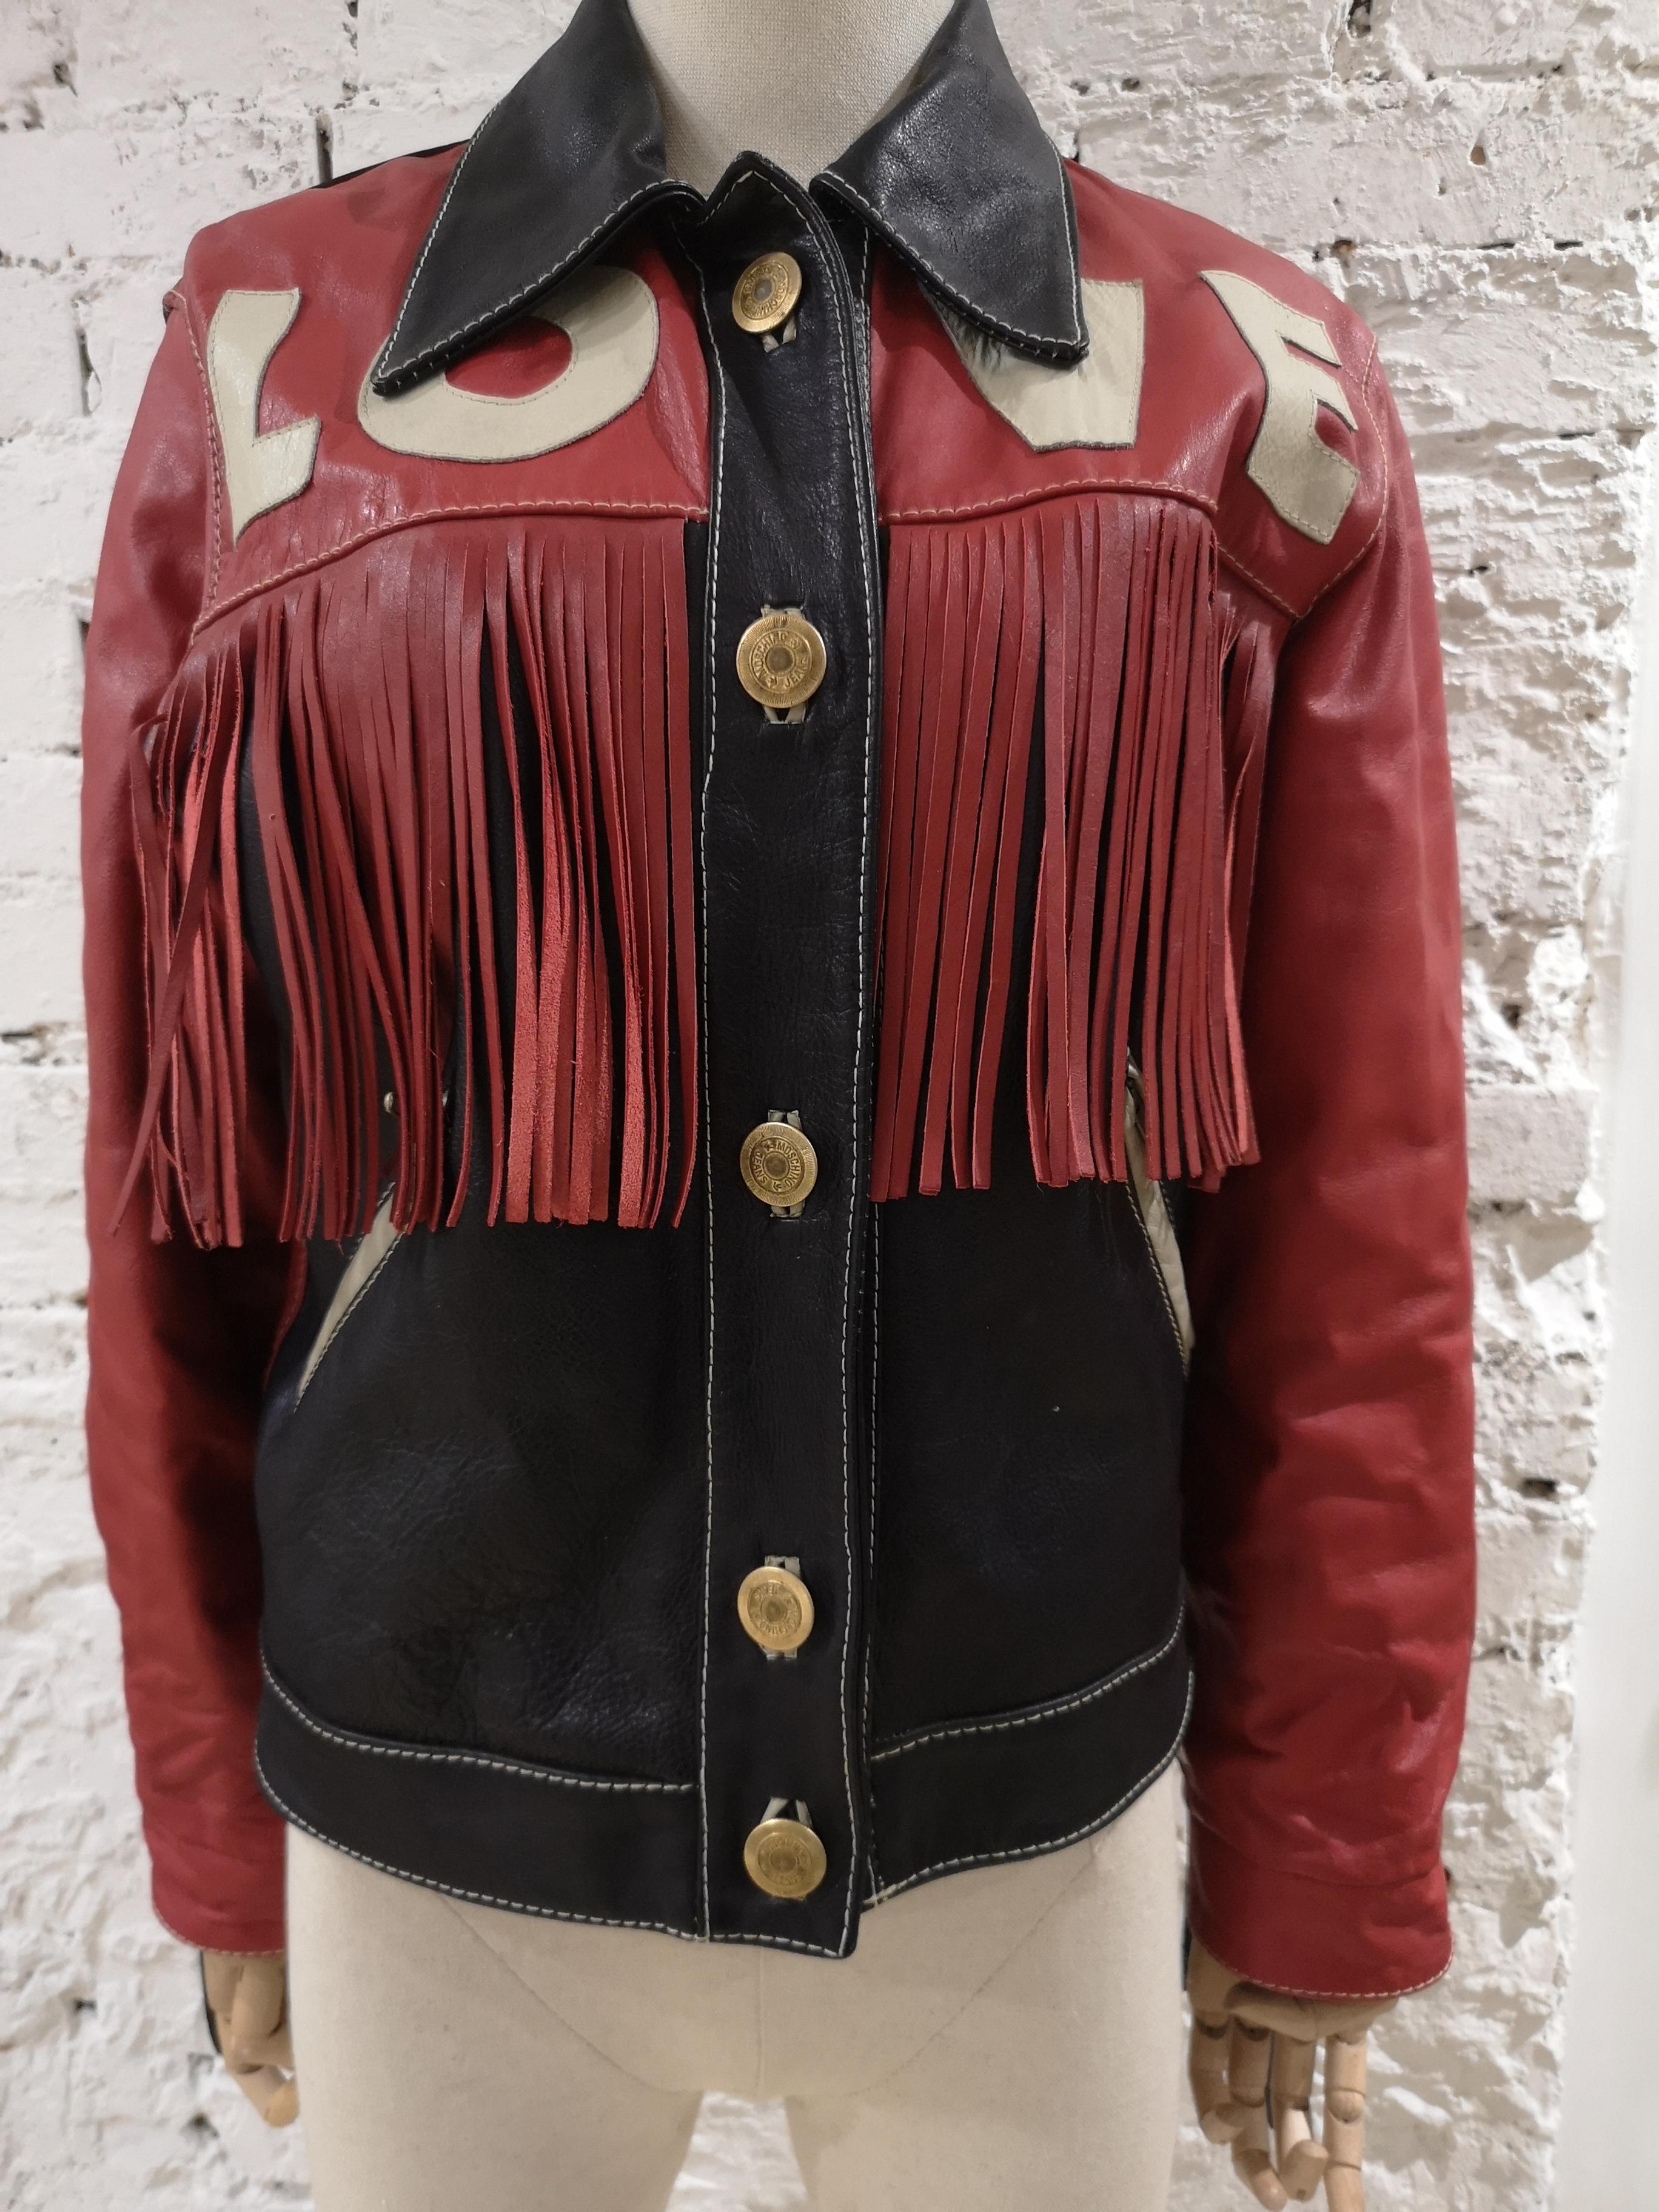 Moschino Love Red Black Leather fringes jacket
Totally made in italy in 100% Leather
size marked is 42
total lenght 60 cm 
shoulder to hem 60 cm